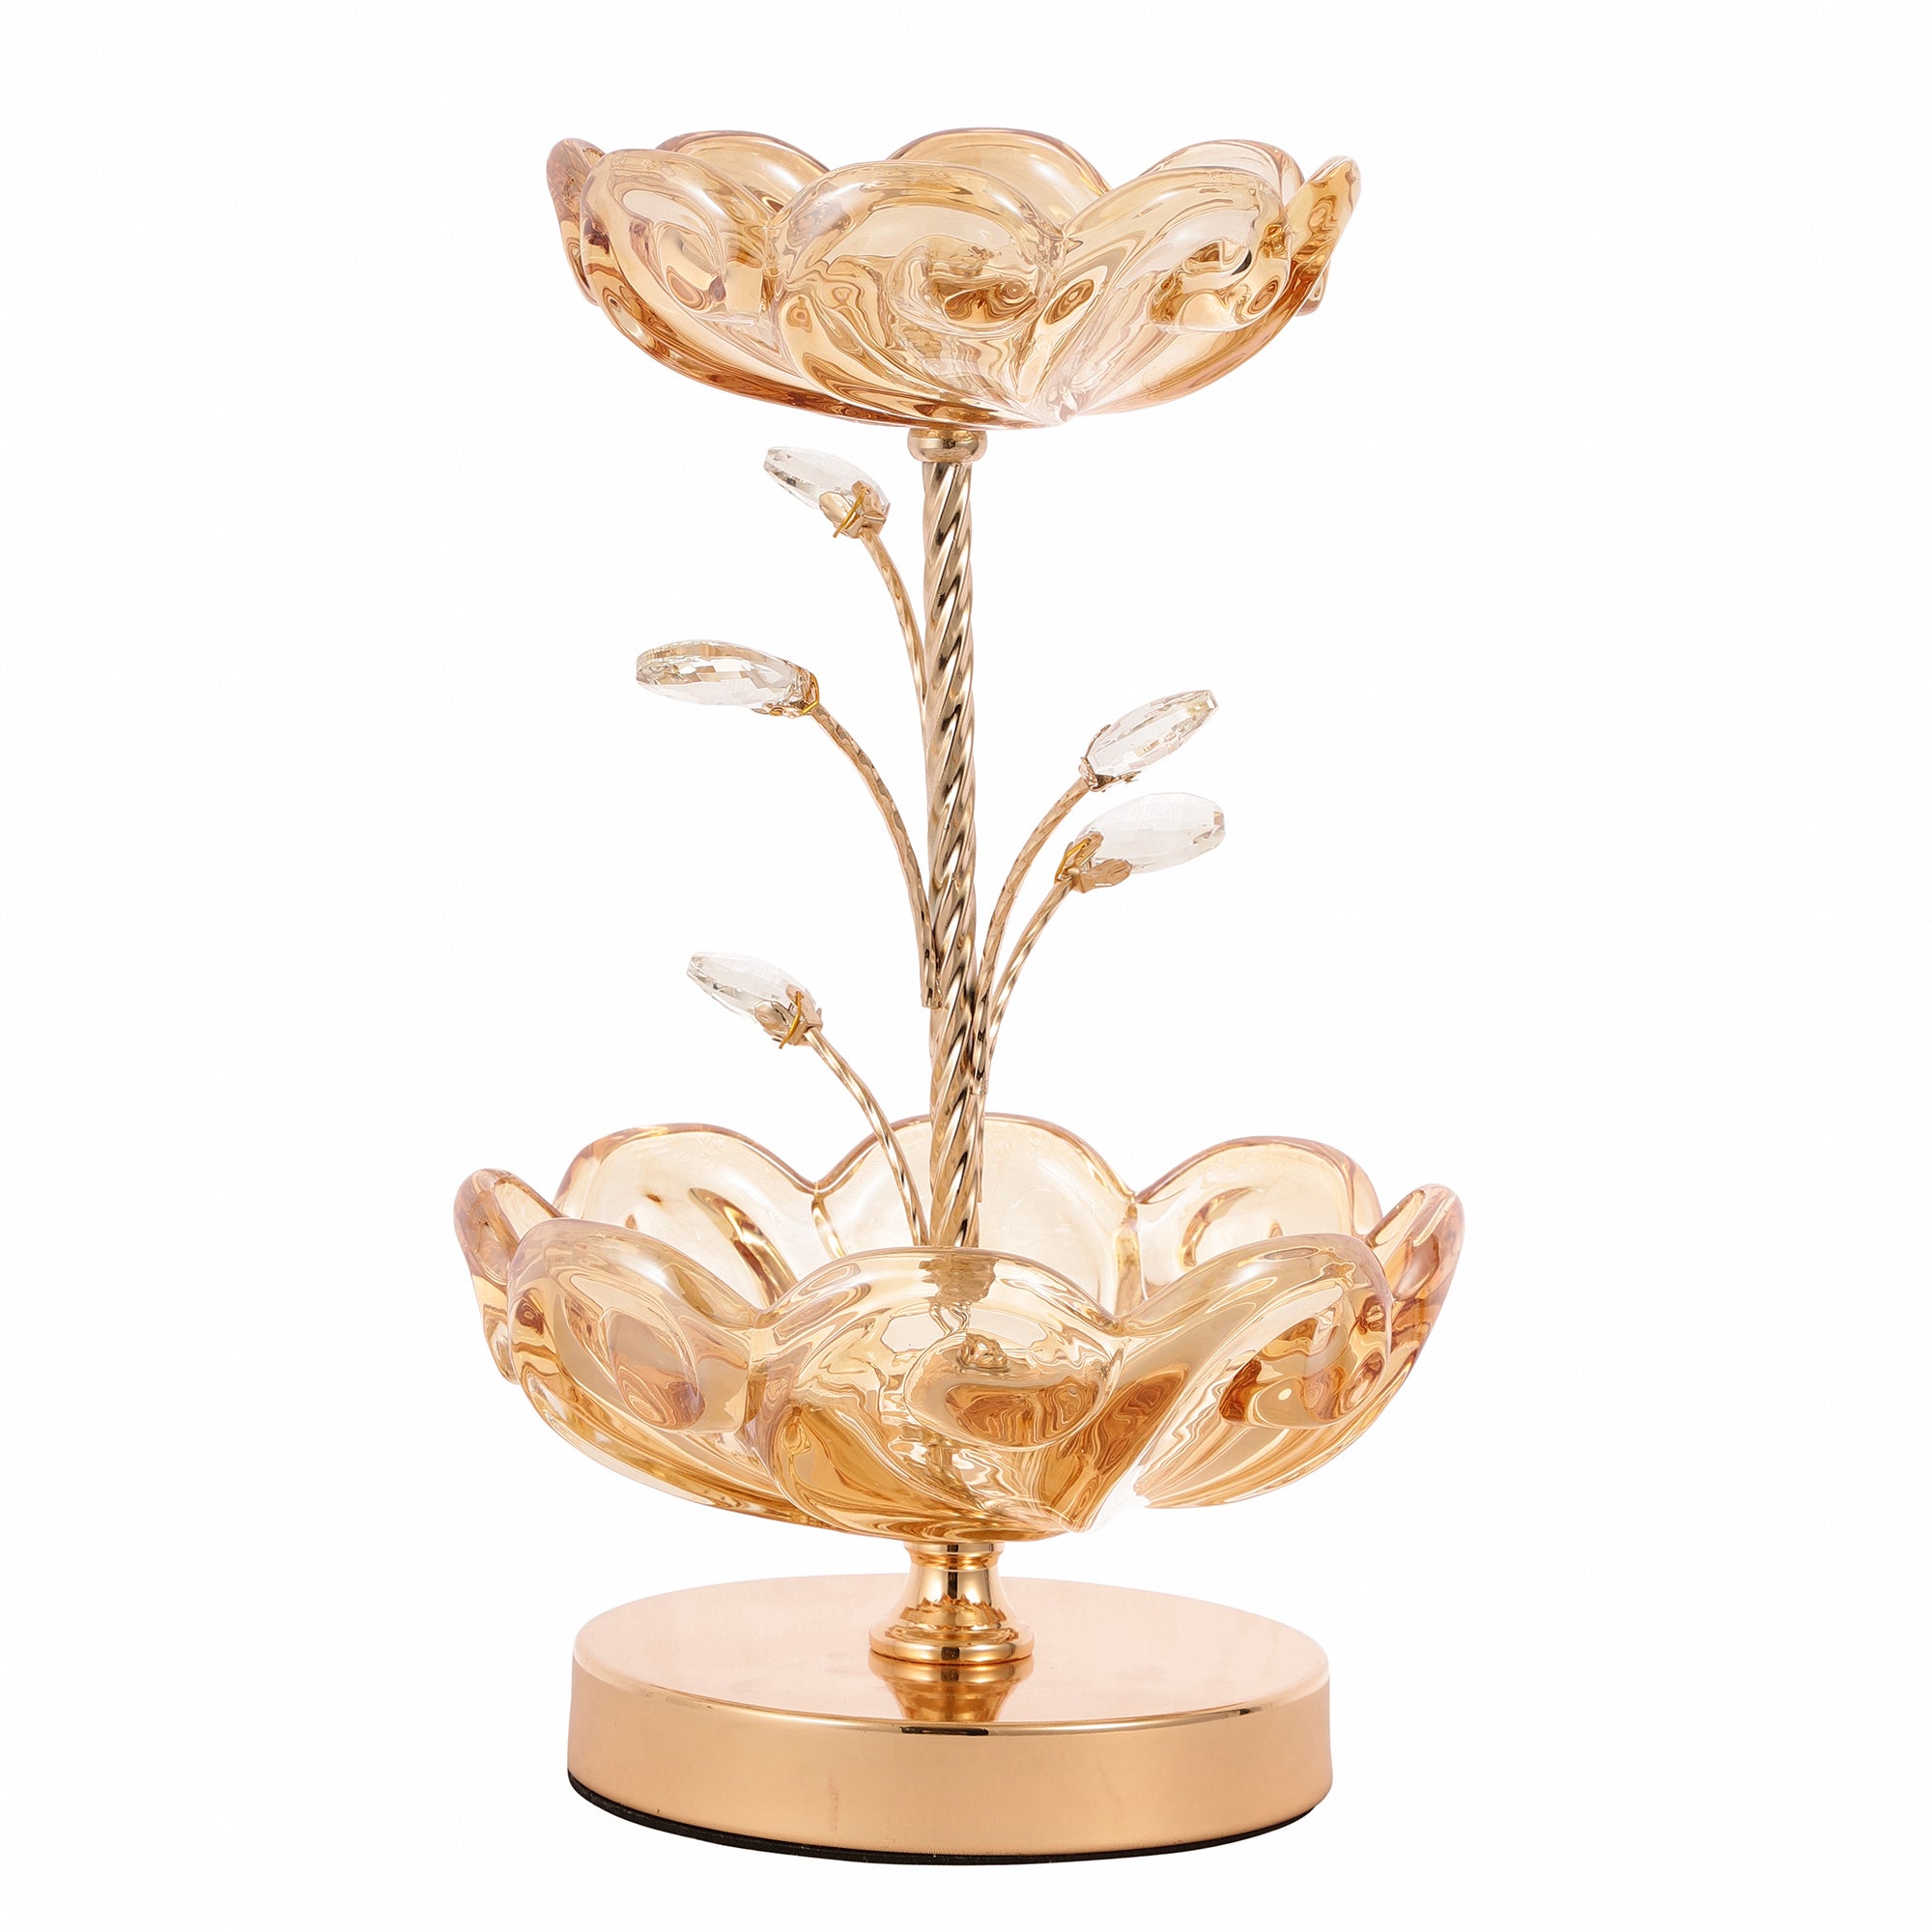 Two-Tier Crystal Glass Serving Platter